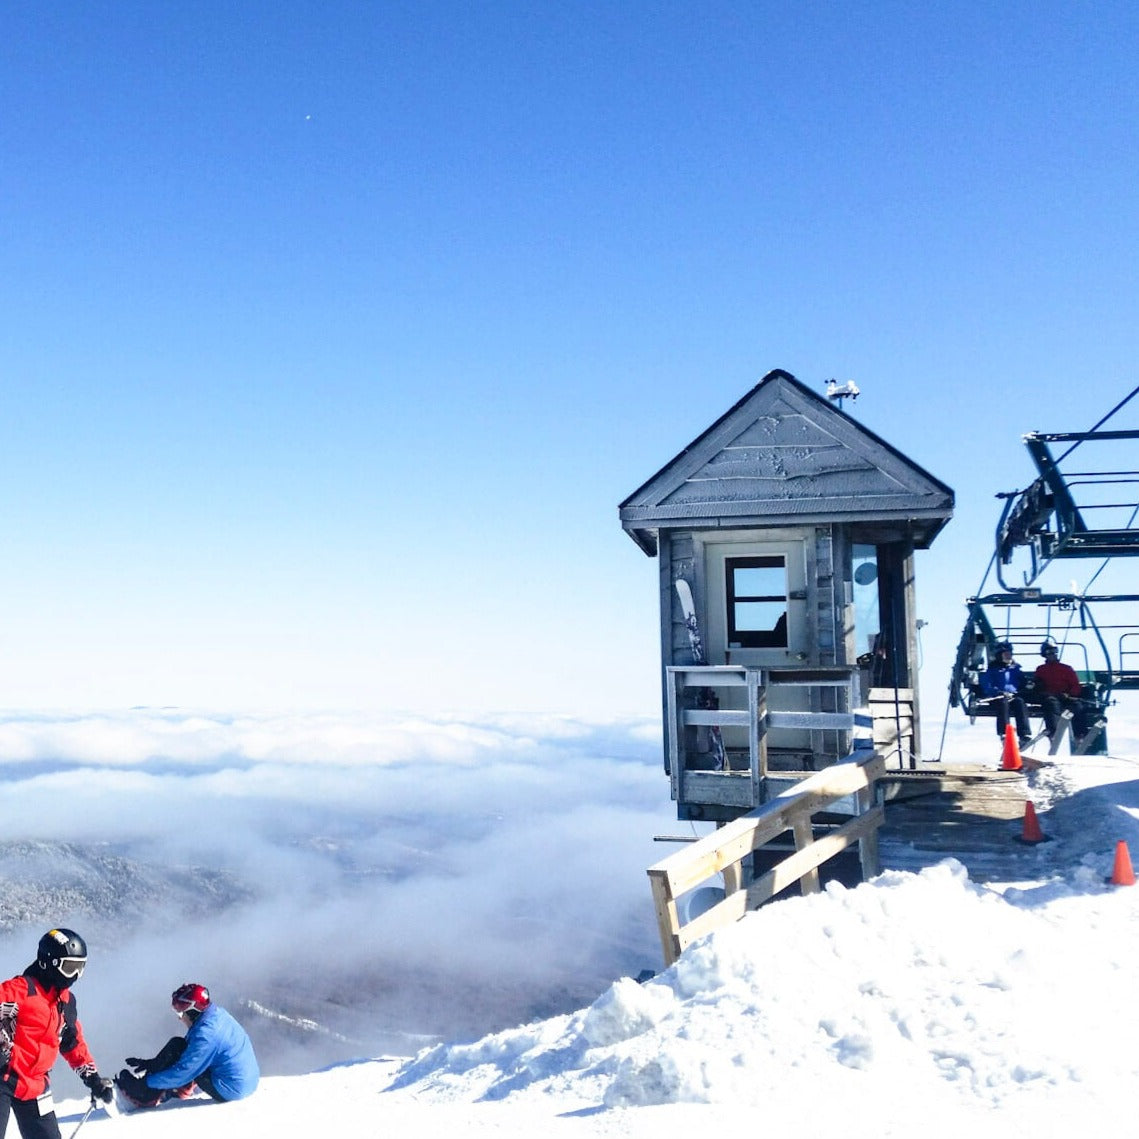 3-Day Jay Peak Wknd Getaway for Snowboarding & Skiing (All Levels)